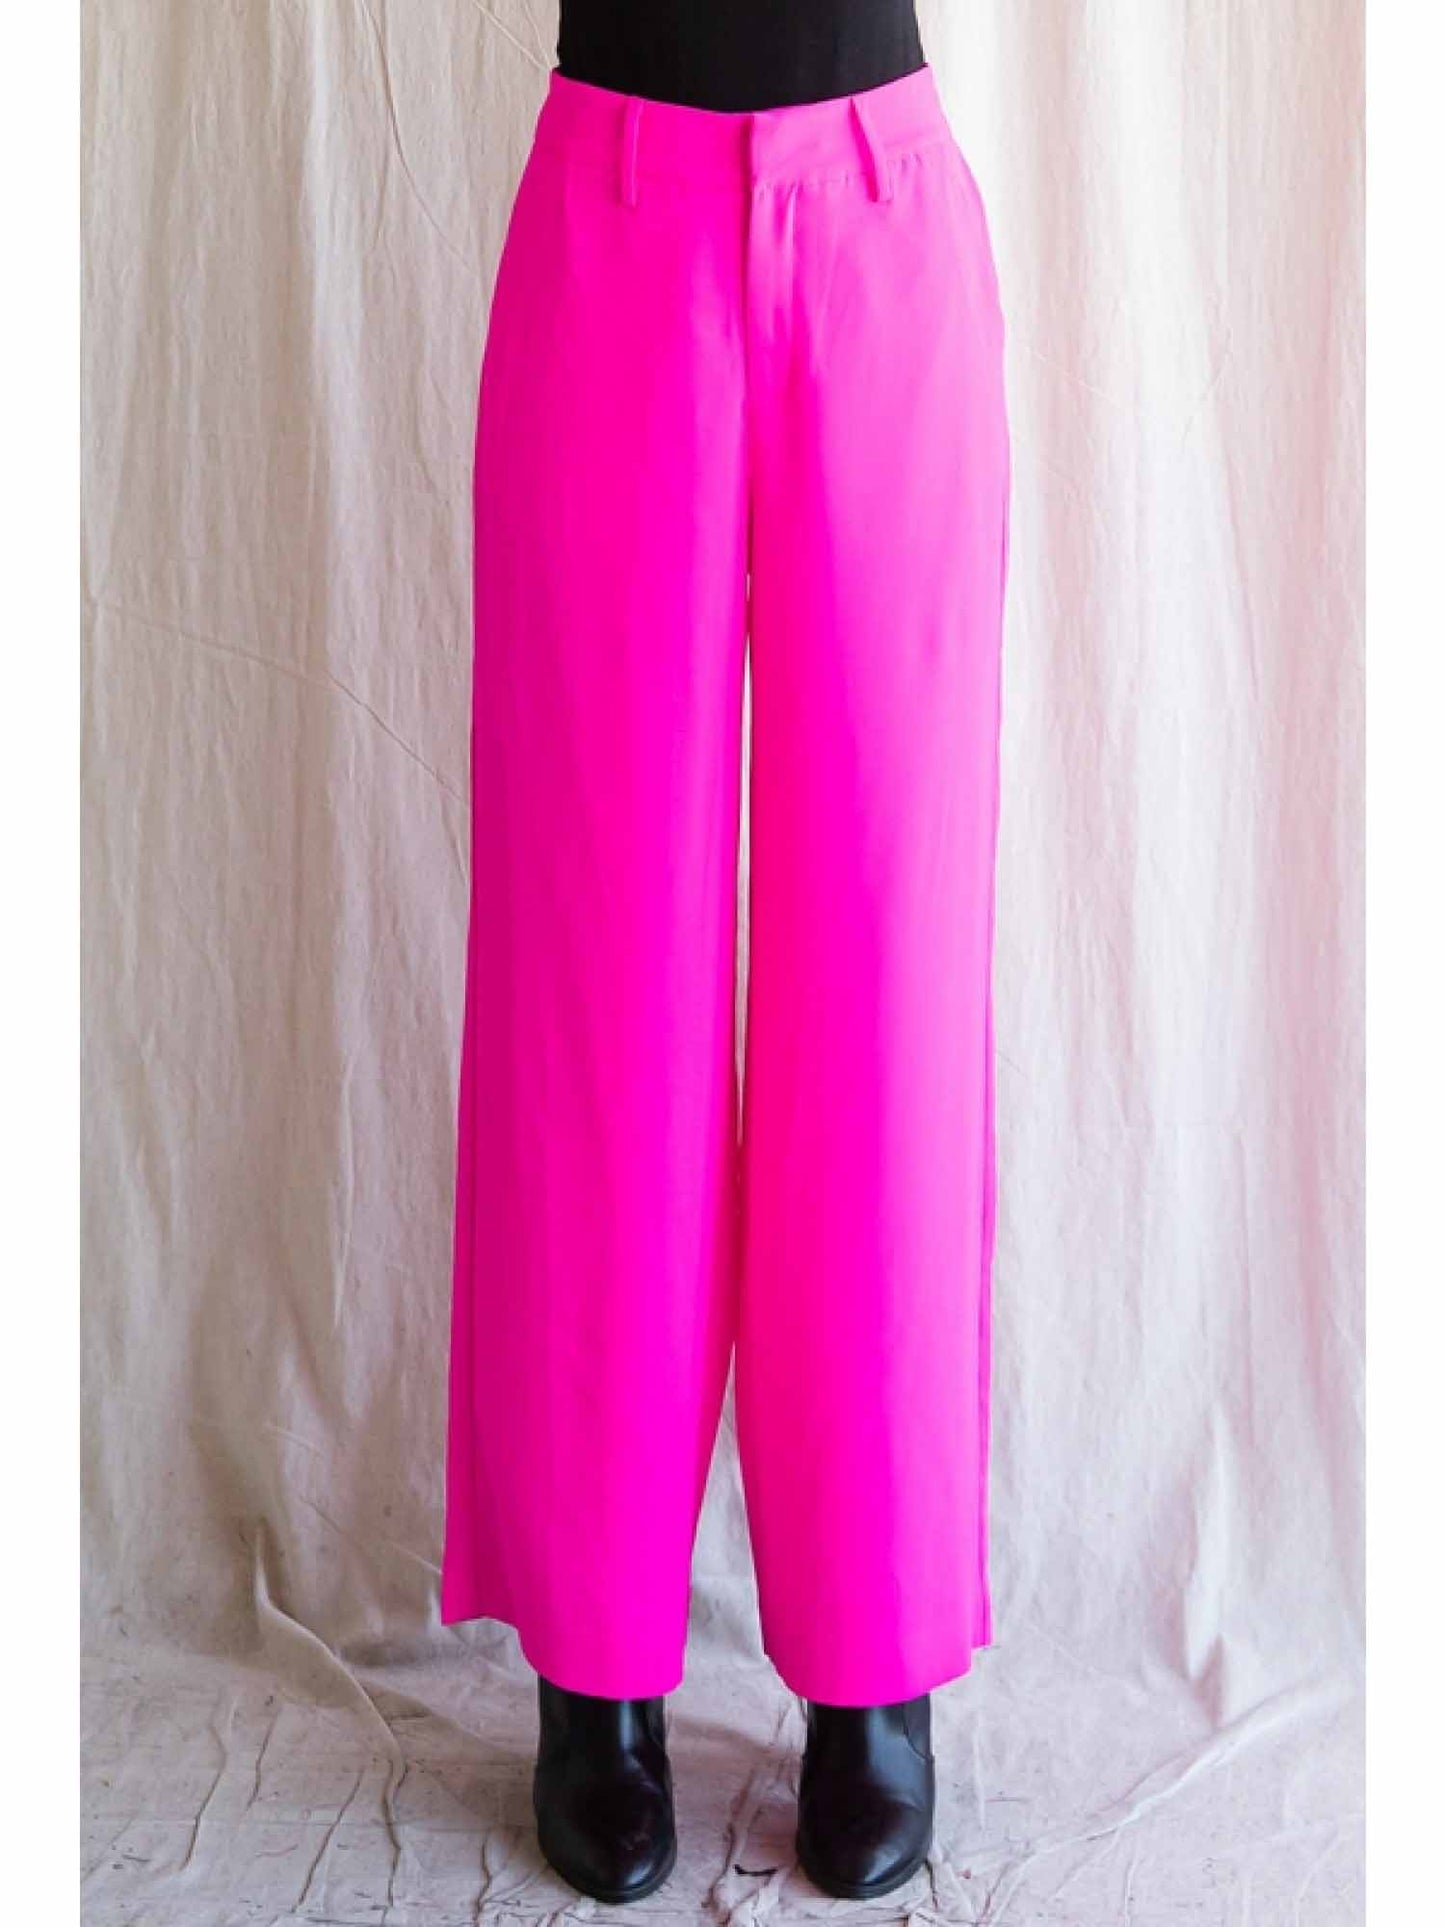 Hot Pink Wide Leg Pants with Pockets by Jodifl